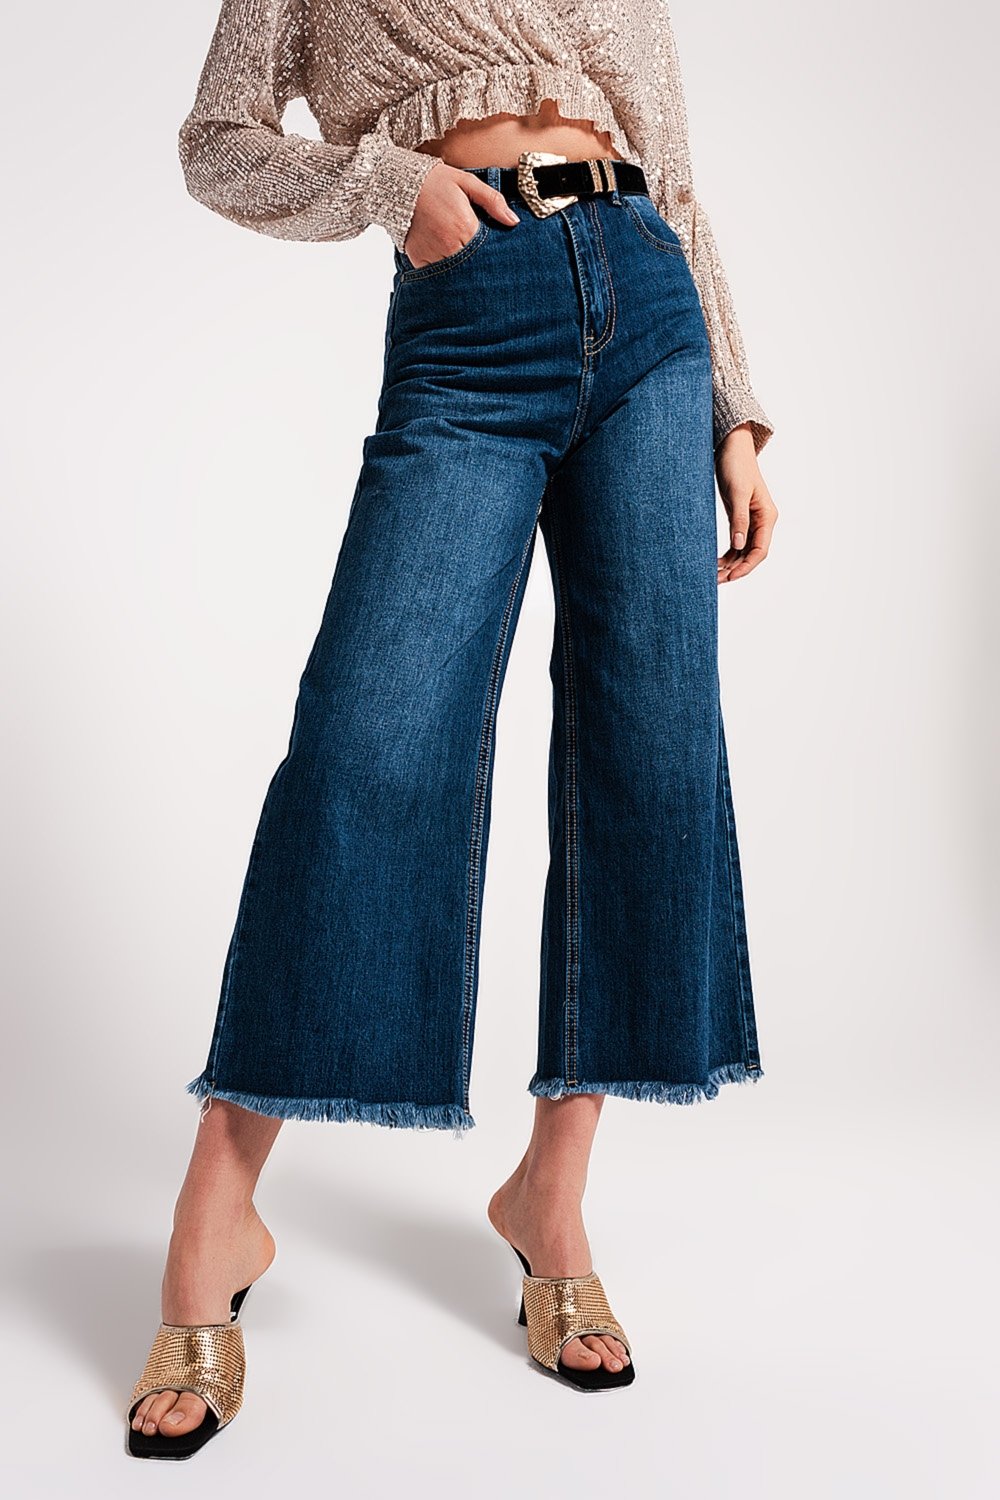 Blue Cropped jeans – Adoro